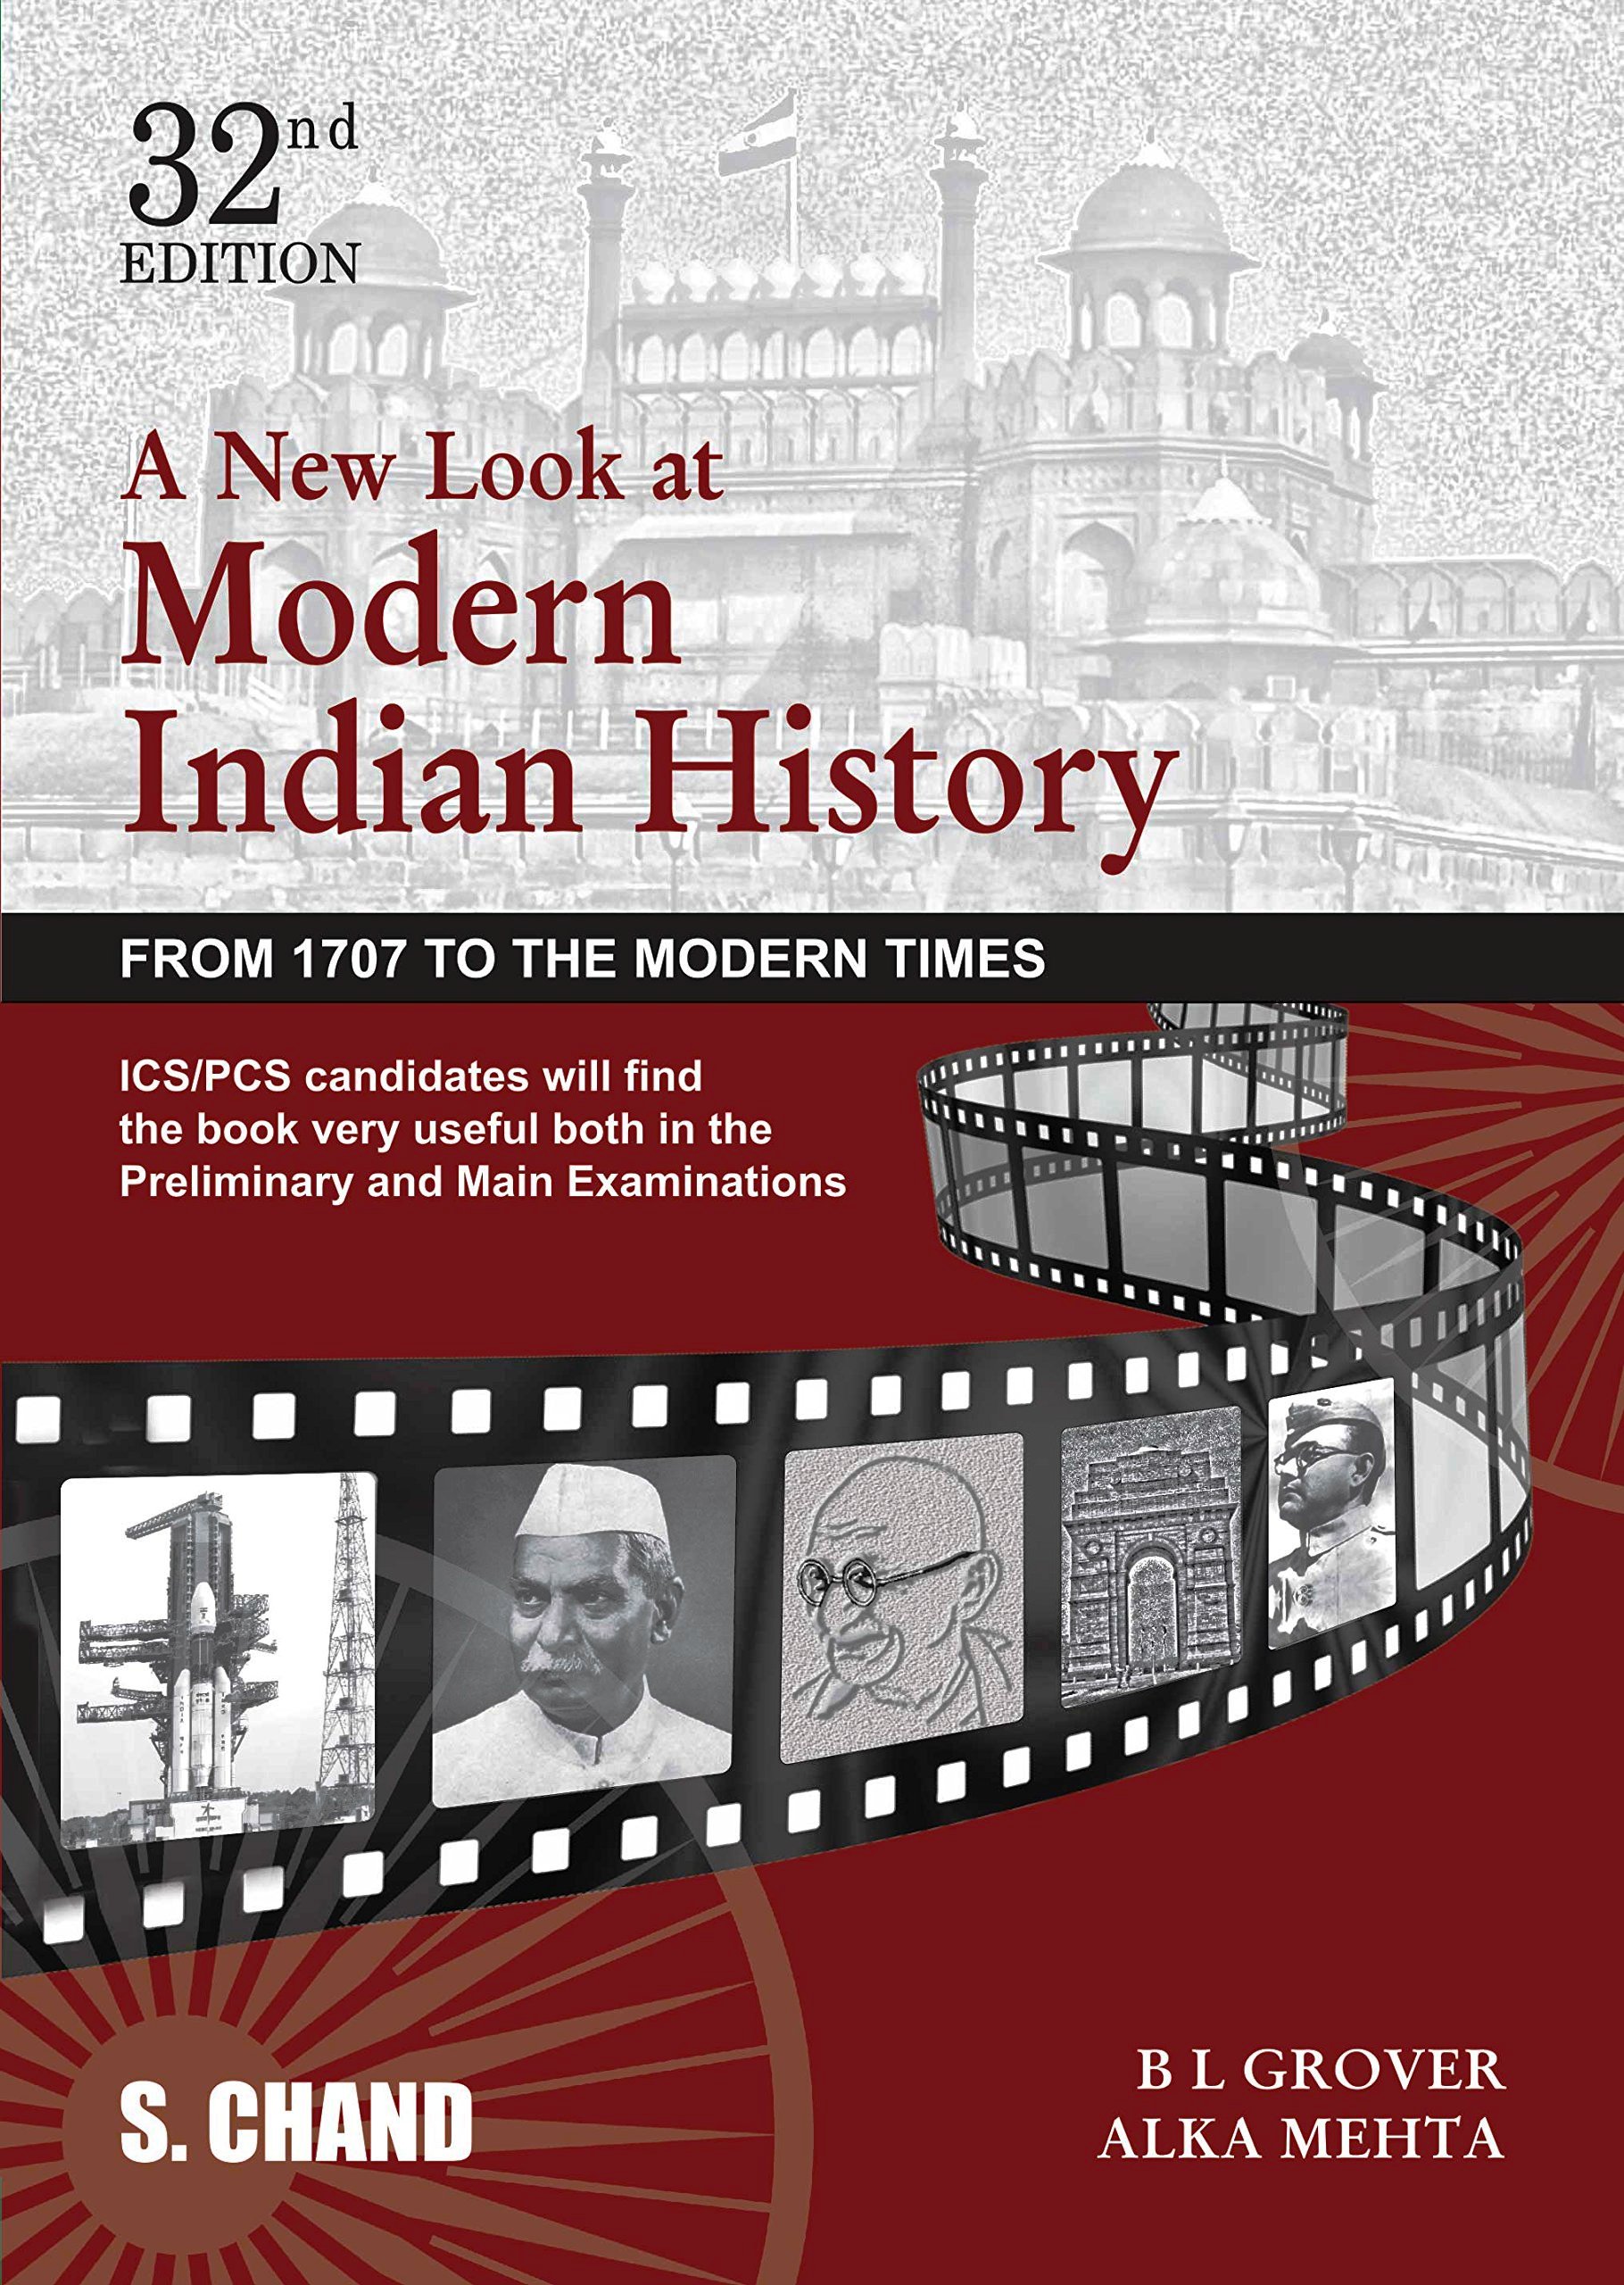 A New Look at Modern Indian History